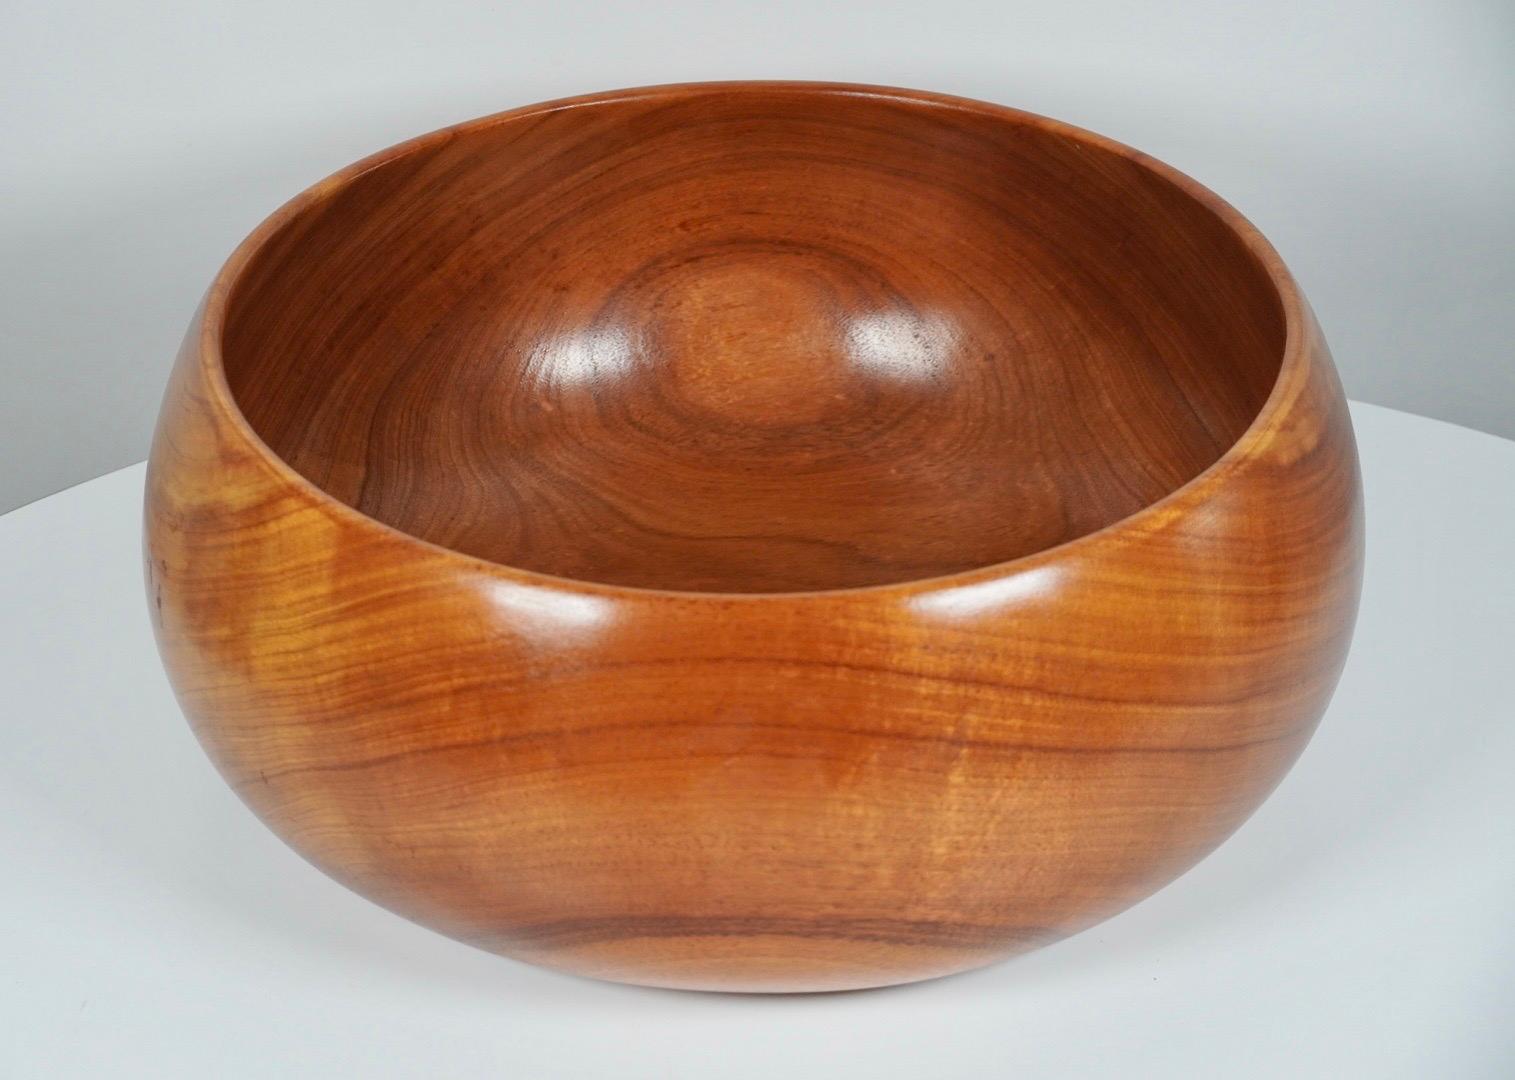 Large hand crafted Koa wood (Acacia koa) bowl, this tree is only found on the Hawaiian Islands, mainly the Big Island and can only be havested from fallen trees. Because of this, its a rare wood and a bowl of this size is quite uncommon. Hand made